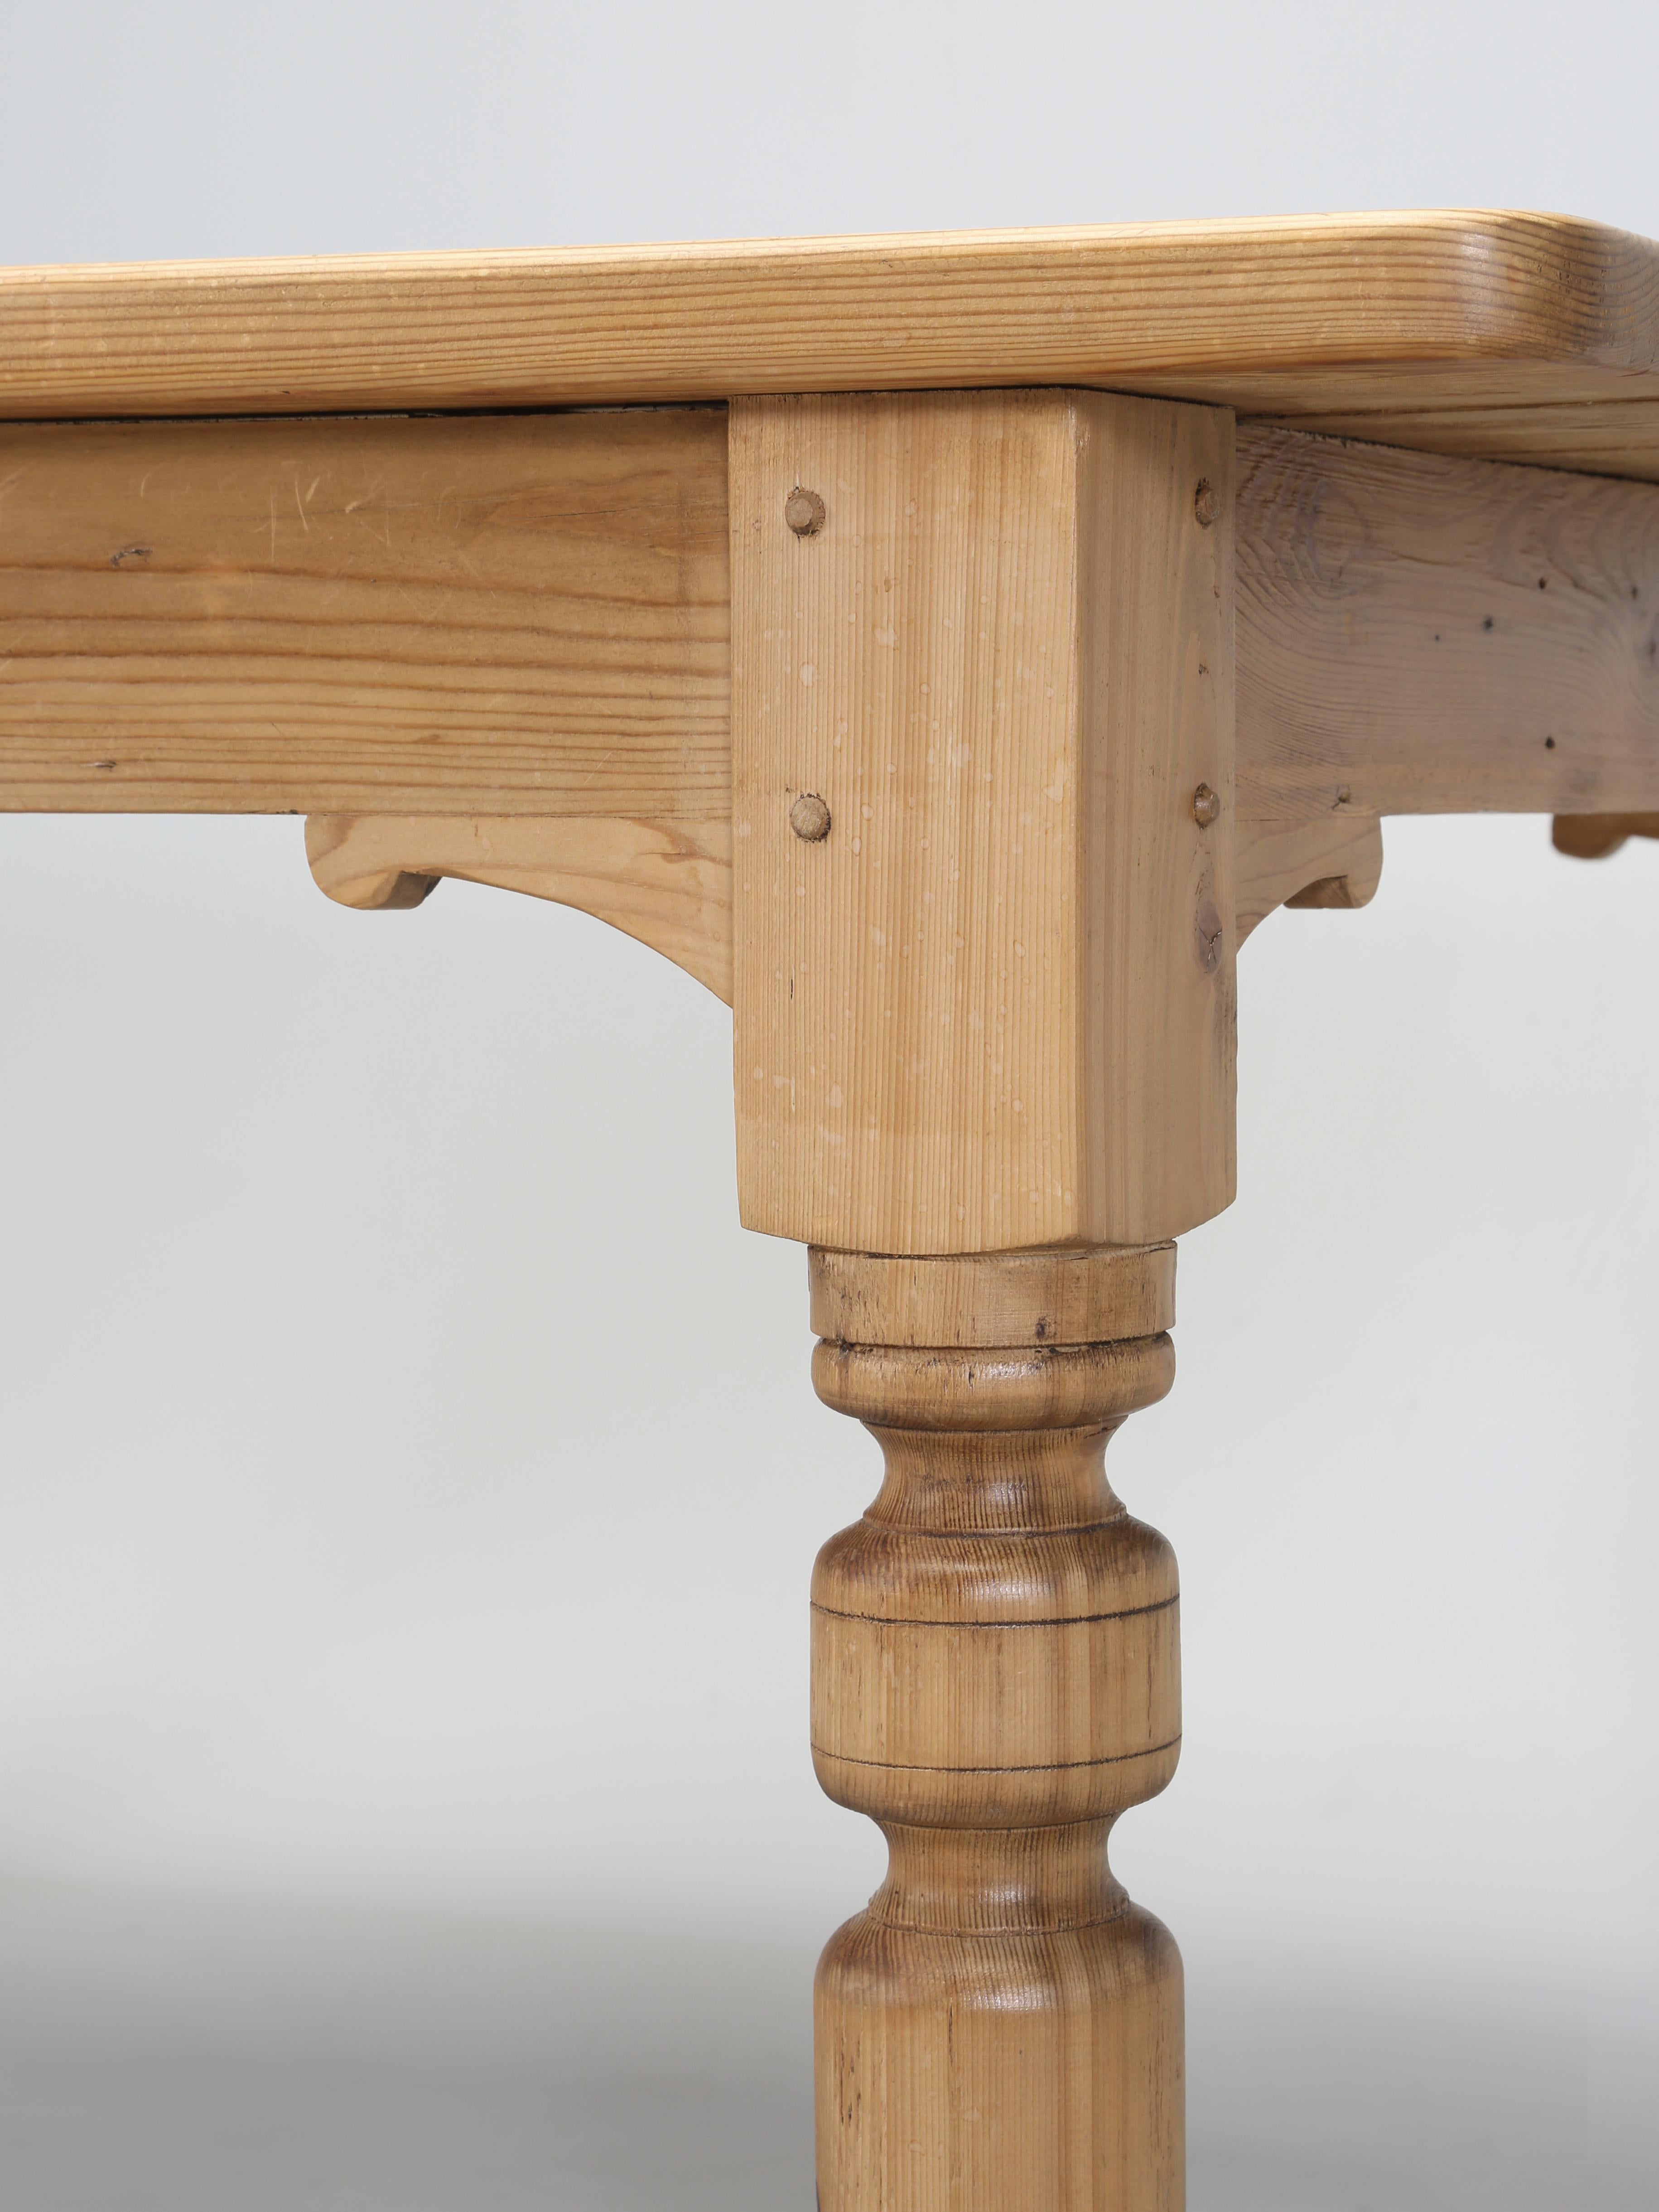 Hand-Crafted Vintage English Pine Farm Table or Kitchen Table Made from Reclaimed Pine in UK